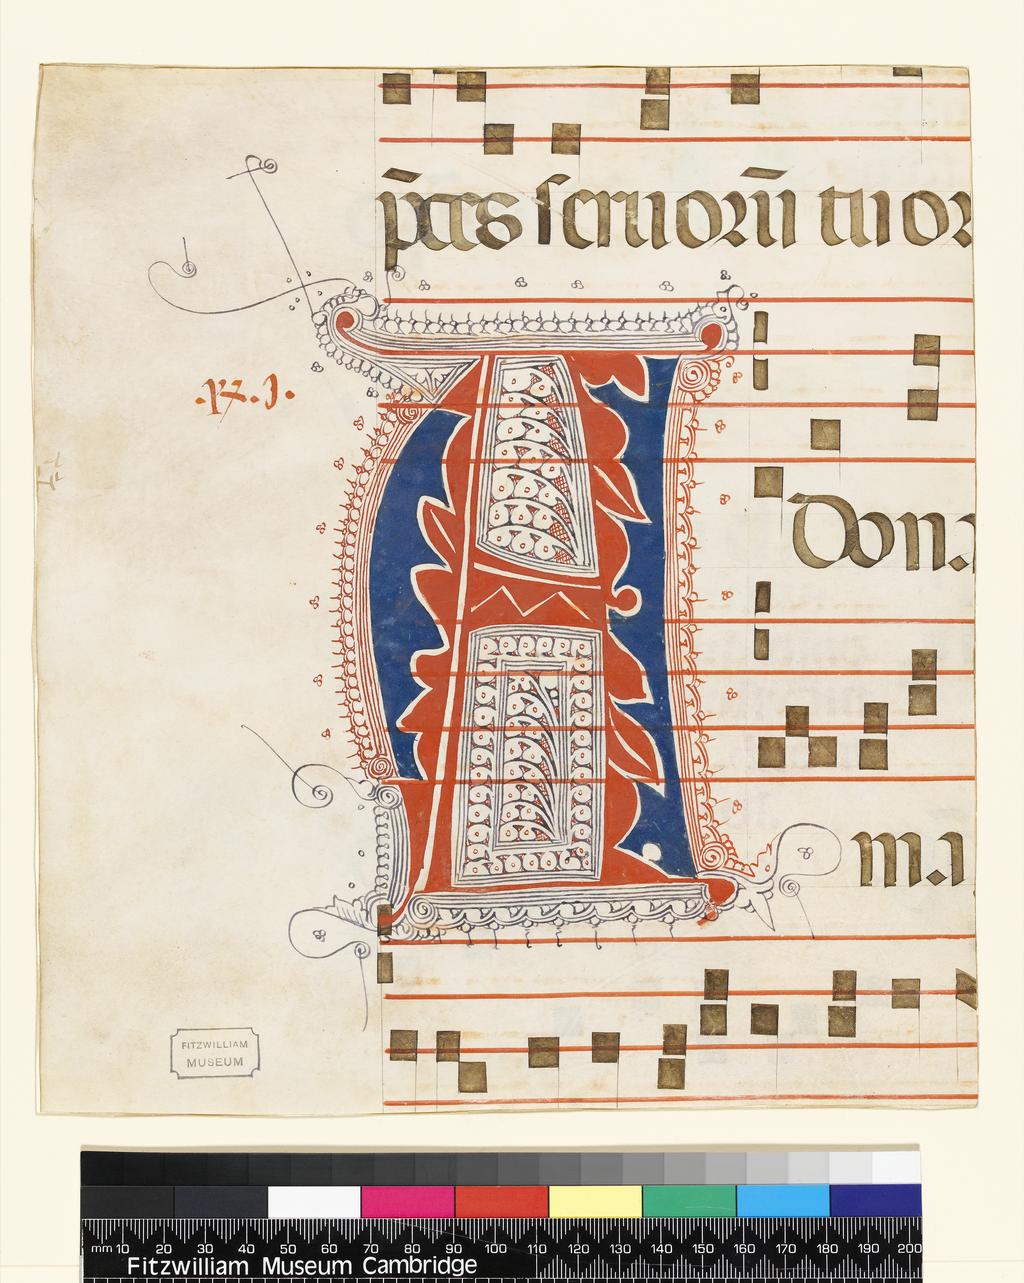 An image of Illuminated manuscript. Cutting. Fragments with ornamental initials from an Antiphoner. Production Place: Italy, Florence. Parchment, gold, penwork, three and a half fragmentary four-line musical staves ruled in red ink and three fragmentary lines of text ruled in black ink on recto and verso. circa 1350. MS McClean 201.12b.2.CONTENTS:  The parted initial opened an antiphon preceded by the rubric Sabb[at]o IIII d[omi]nice quando ponitur ystoria iudith ad m. ana; on reverse, part of the second responsory to the first lesson in Matins on Sundays in mid-September, Omni tempo[re benedic Deum et] pete ab eo ut vias tu[as dirigat].ORNAMENTATION: Five blue and red parted initials with purple and red pen-flourished infill and extensions: MS McClean 201.12b.2 [A, 2 ll.]; MS McClean 201.12b.3 [M, 2 ll.]; MS McClean 201.12b.4 [P. 2 ll.]; MS McClean 201.12b.5 [S, 2 ll.]; MS McClean 201.12b.6 [Q, 2 ll.]. Alternate blue and red one-line penwork initials with red or purple pen flourishing on remaining fragments and on the reverse of MSS McClean 201.12b.2, McClean 201.12b.3 and McClean 201.12b.4.